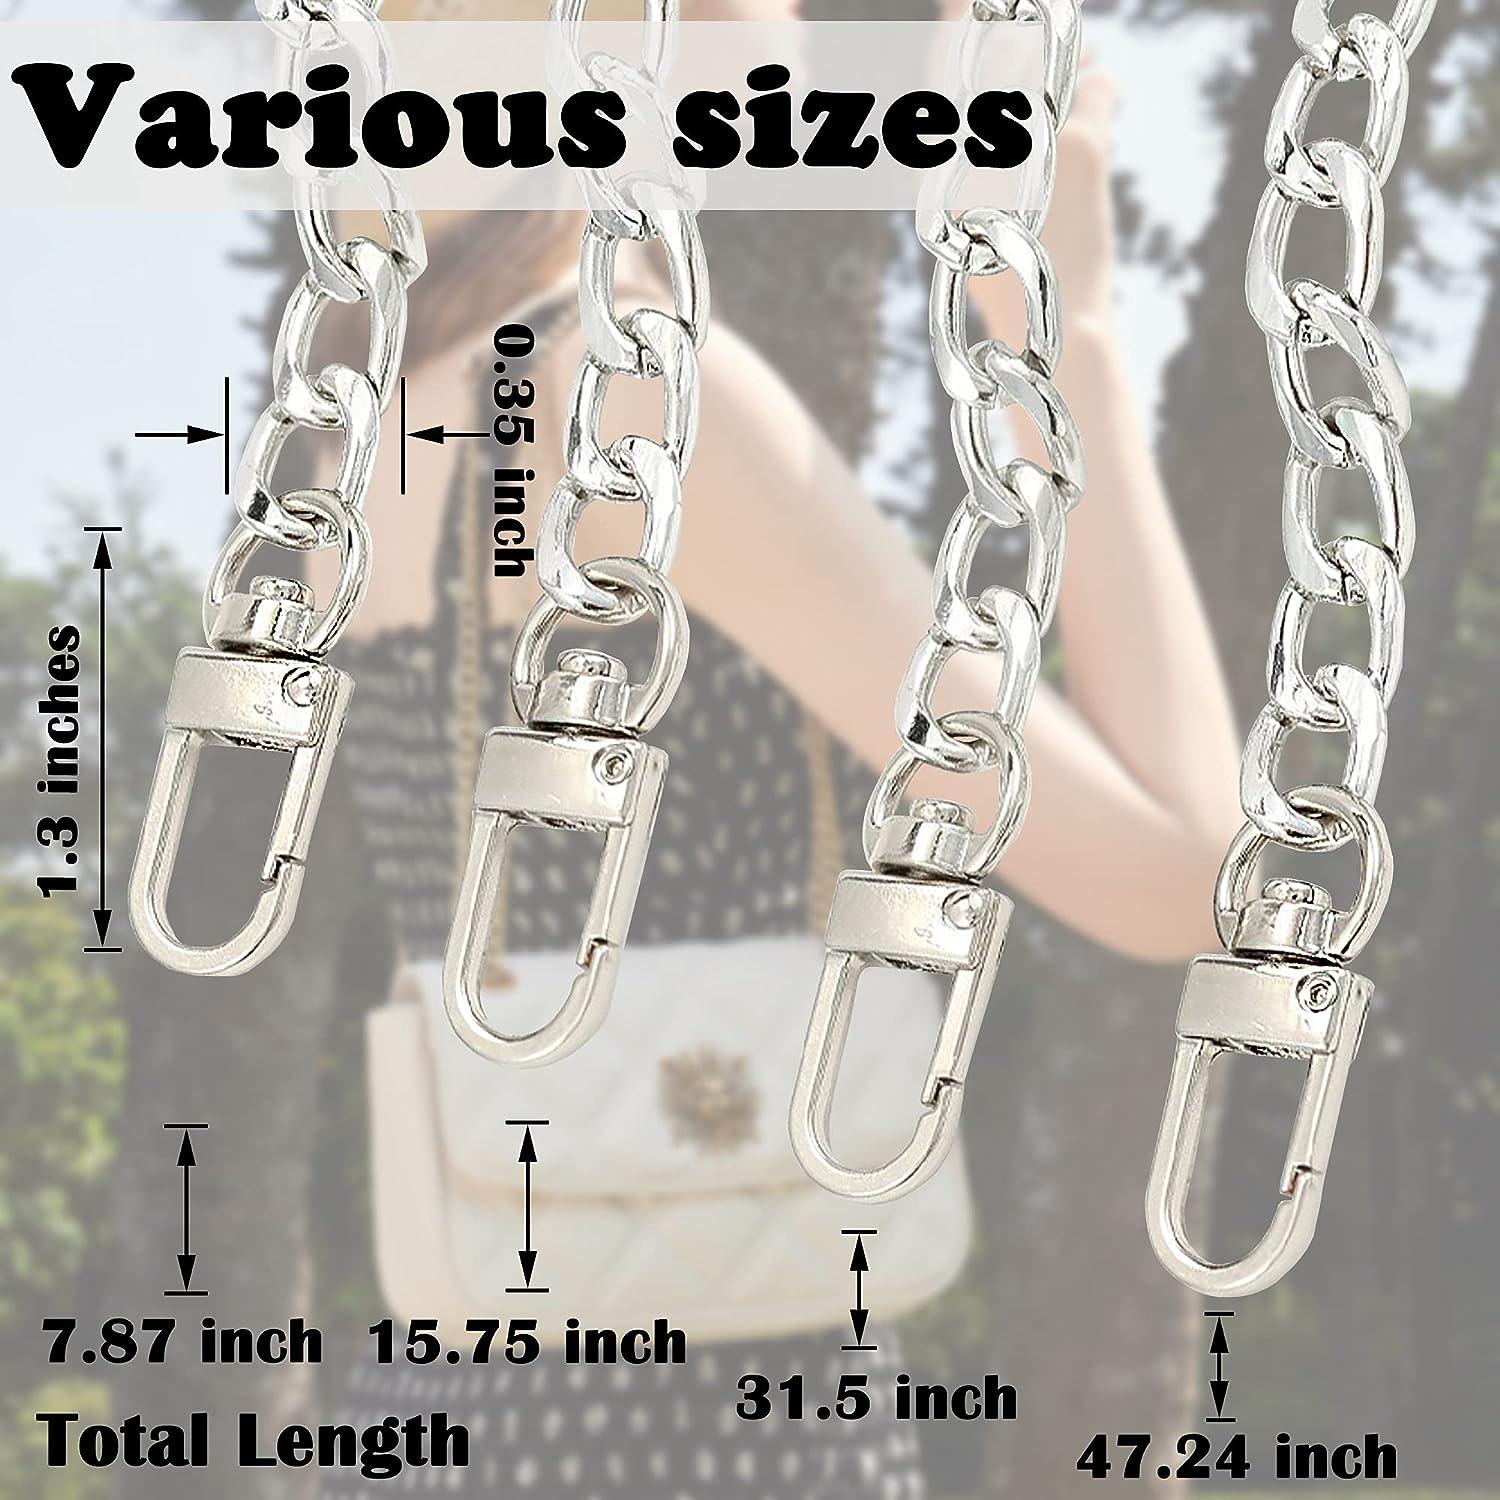 Yuronam 4 Different Sizes Flat Purse Chain Iron Bag Link Chains Shoulder  Straps Chains with Metal Buckles Hook for Replacement, DIY Handbags Crafts,  47.2/31.5/15.7/7.9 Inches(Silver) Multi size Silver